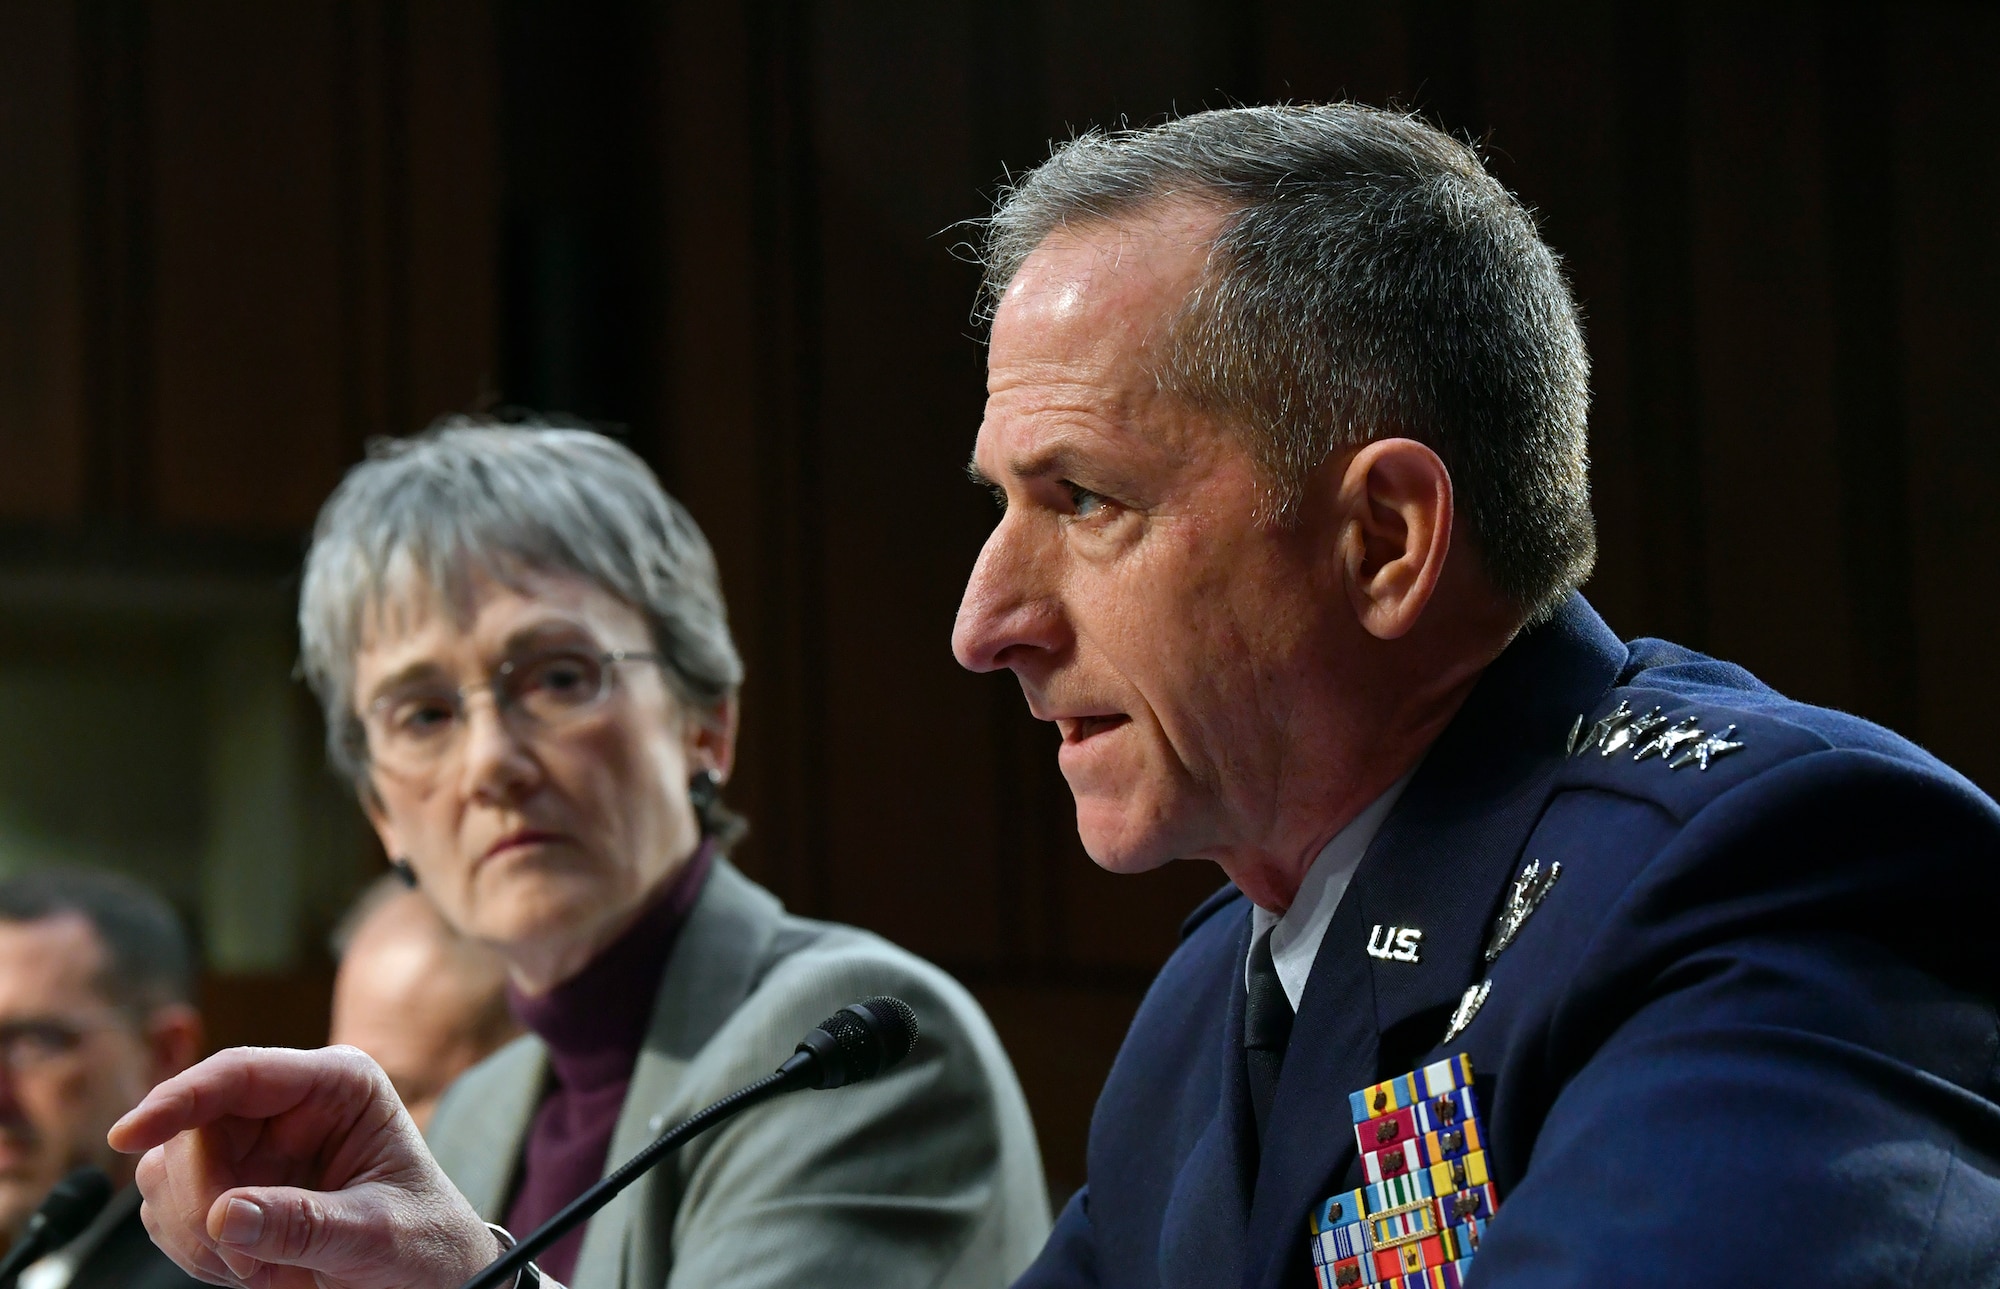 Air Force Chief of Staff Gen. David L. Goldfein and Secretary of the Air Force Heather Wilson provide testimony to the Senate Armed Services Committee in Washington, D.C., March 7, 2019. The committee examined privatized military housing for service members and their families. (U.S. Air Force Photo by Wayne Clark)